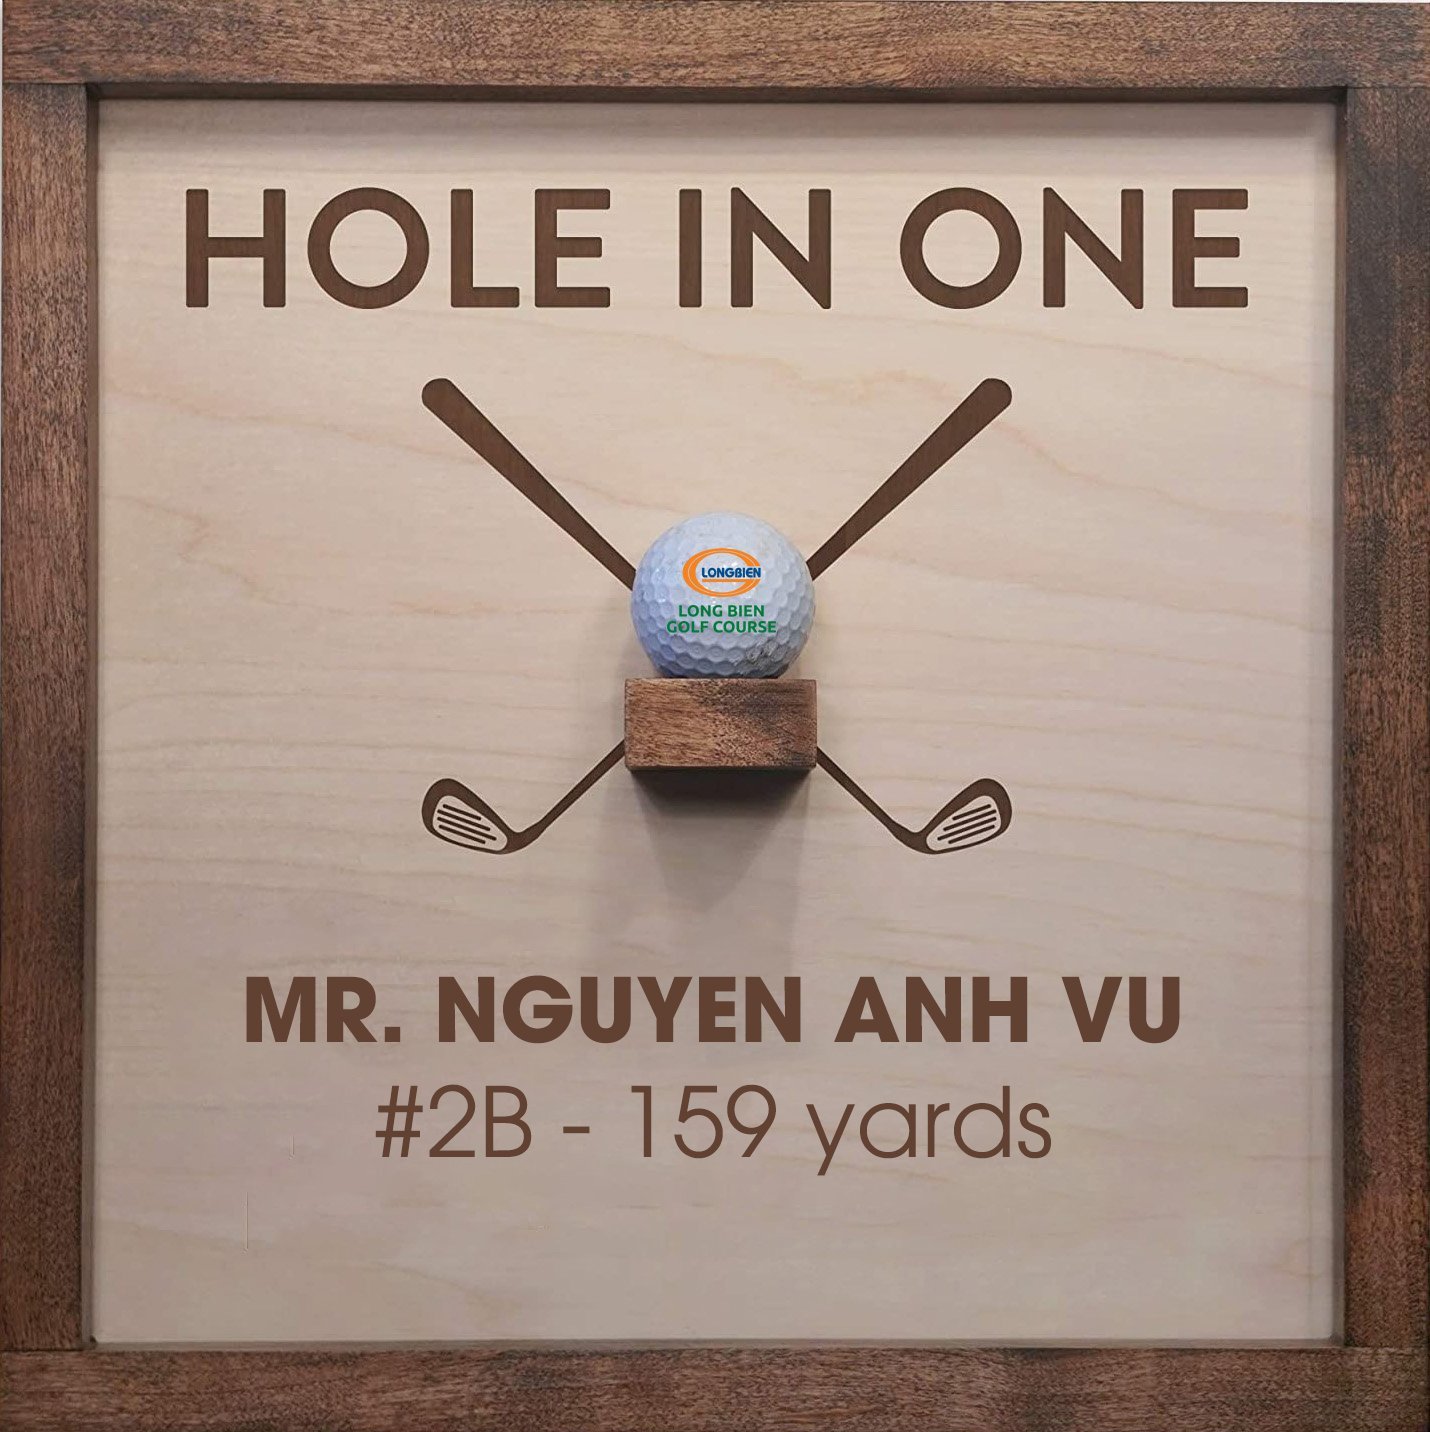 HOLE IN ONE BỞI GOLFER NGUYỄN ANH VŨ